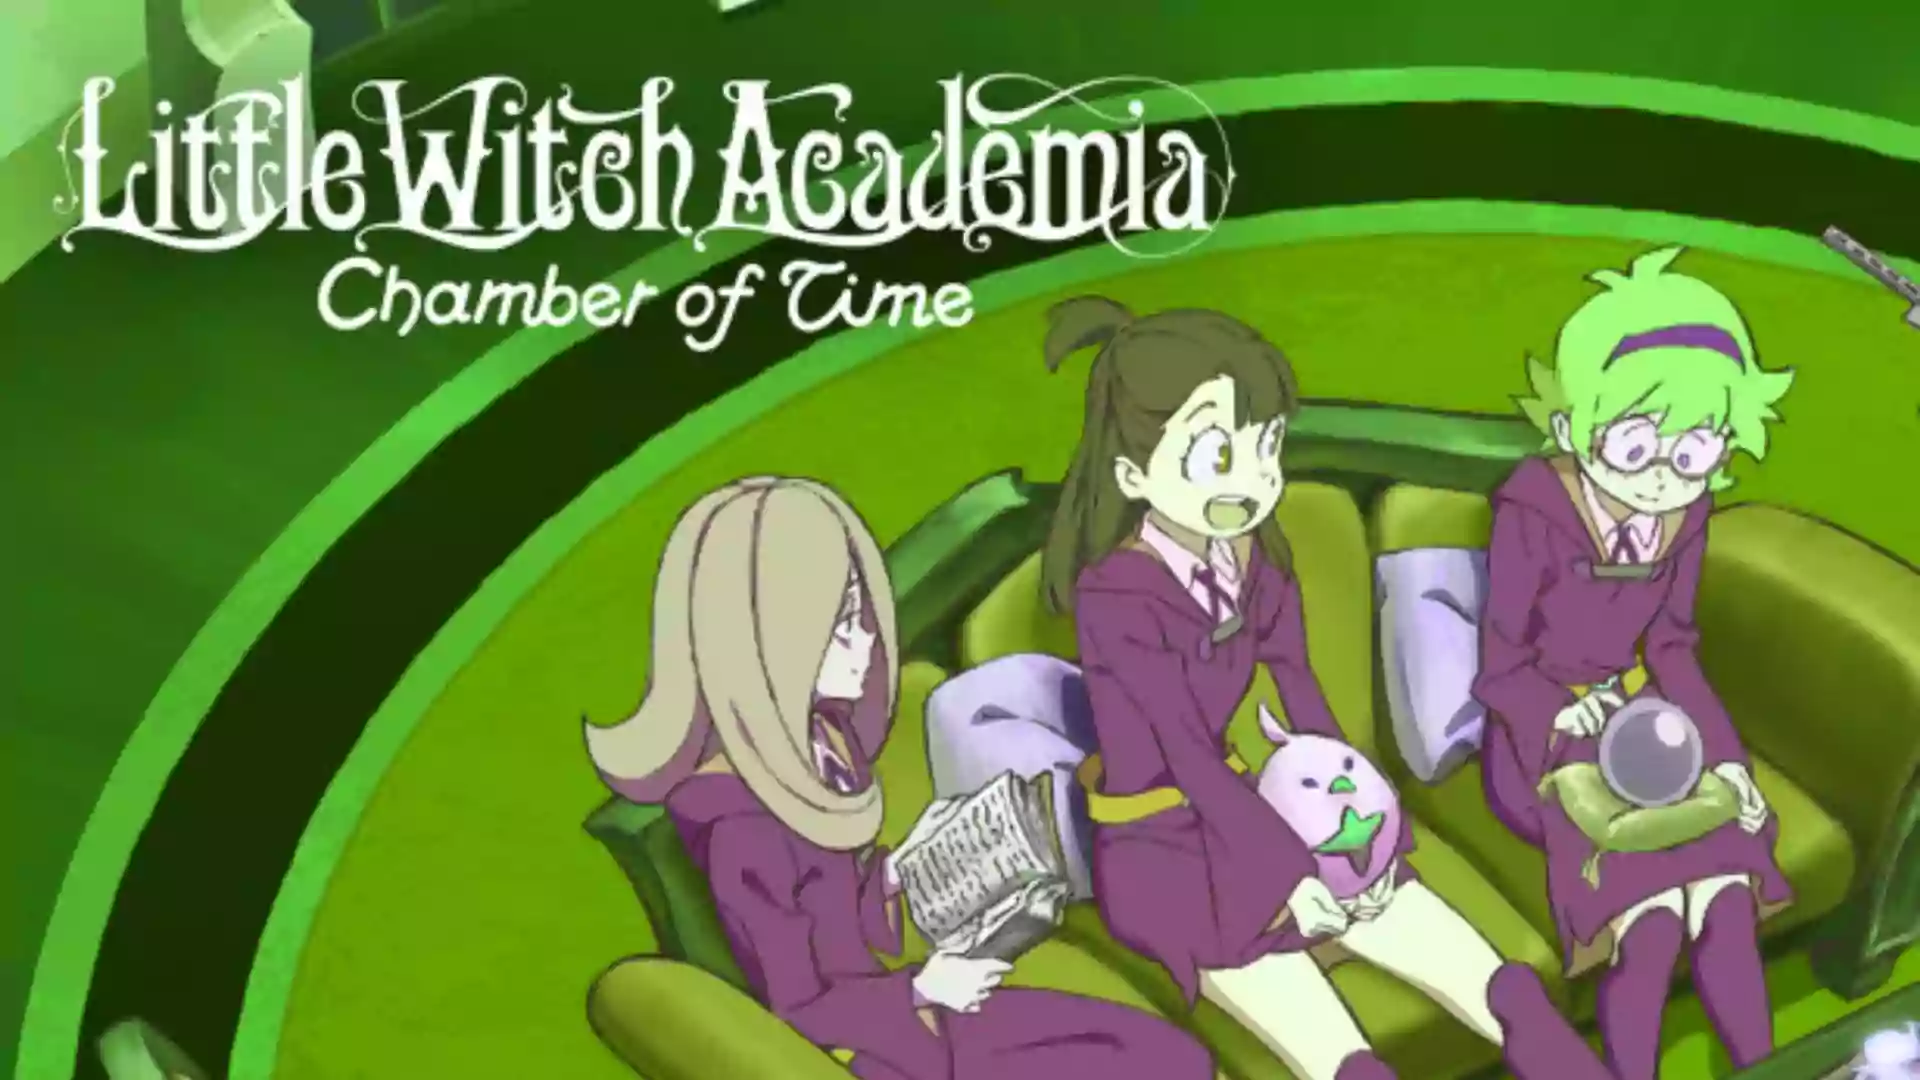 Little Witch Academia Parents Guide and Age Rating | 2017